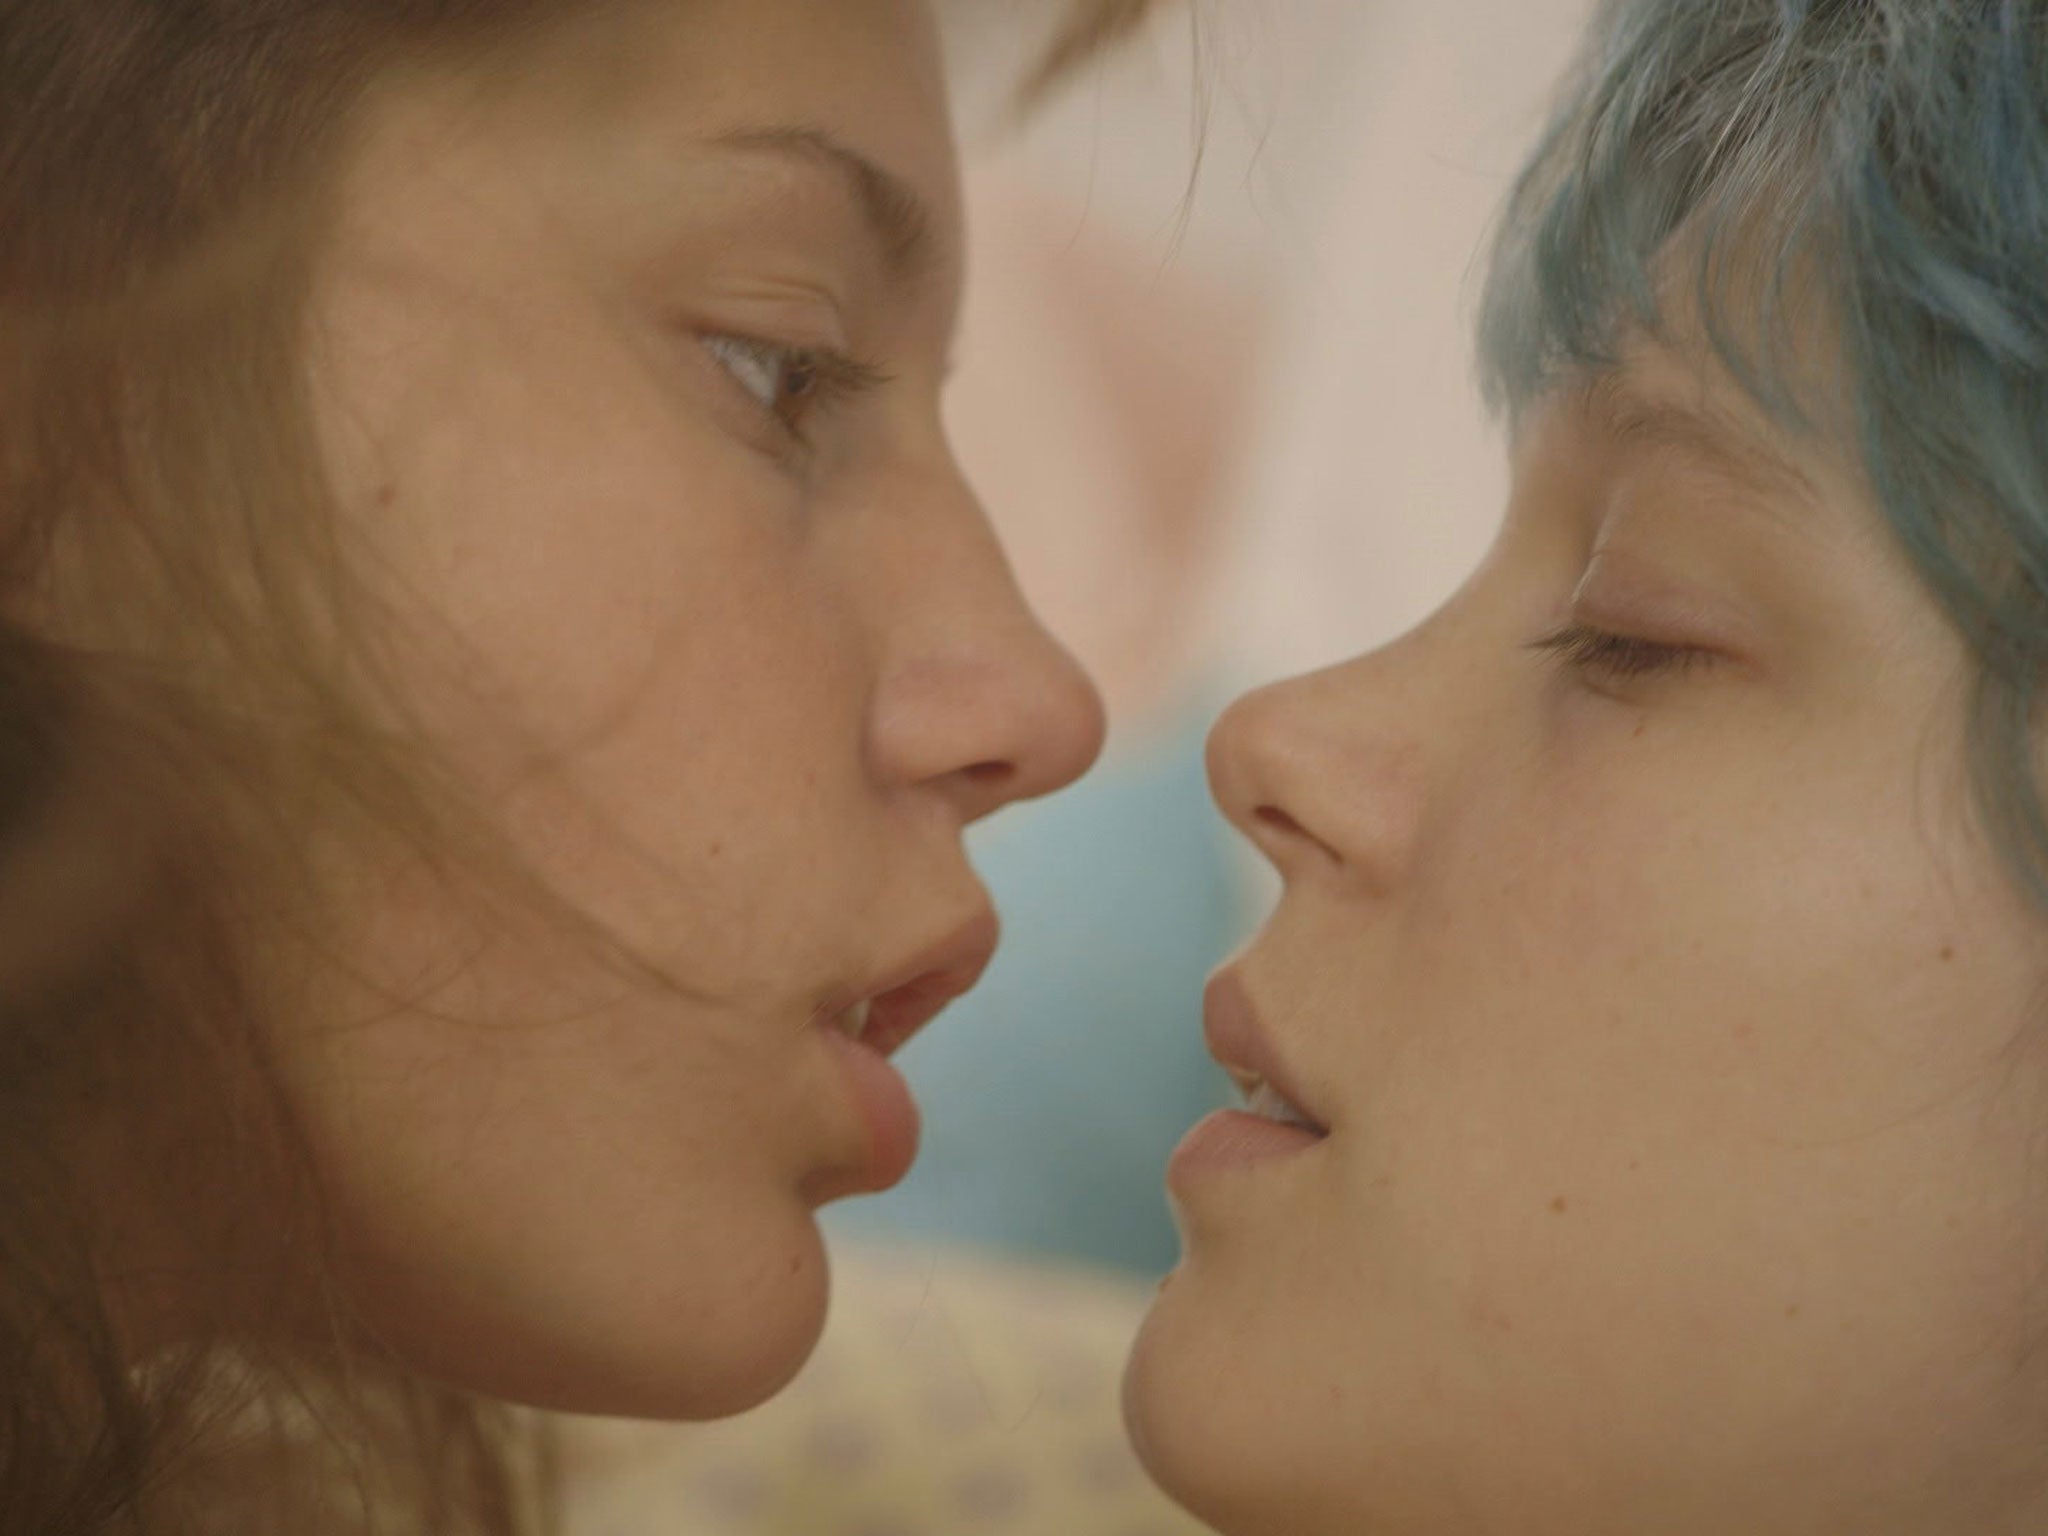 Adèle Exarchopoulos and Léa Seydoux play teeneage lovers in the French erotic drama 'Blue Is The Warmest Colour'